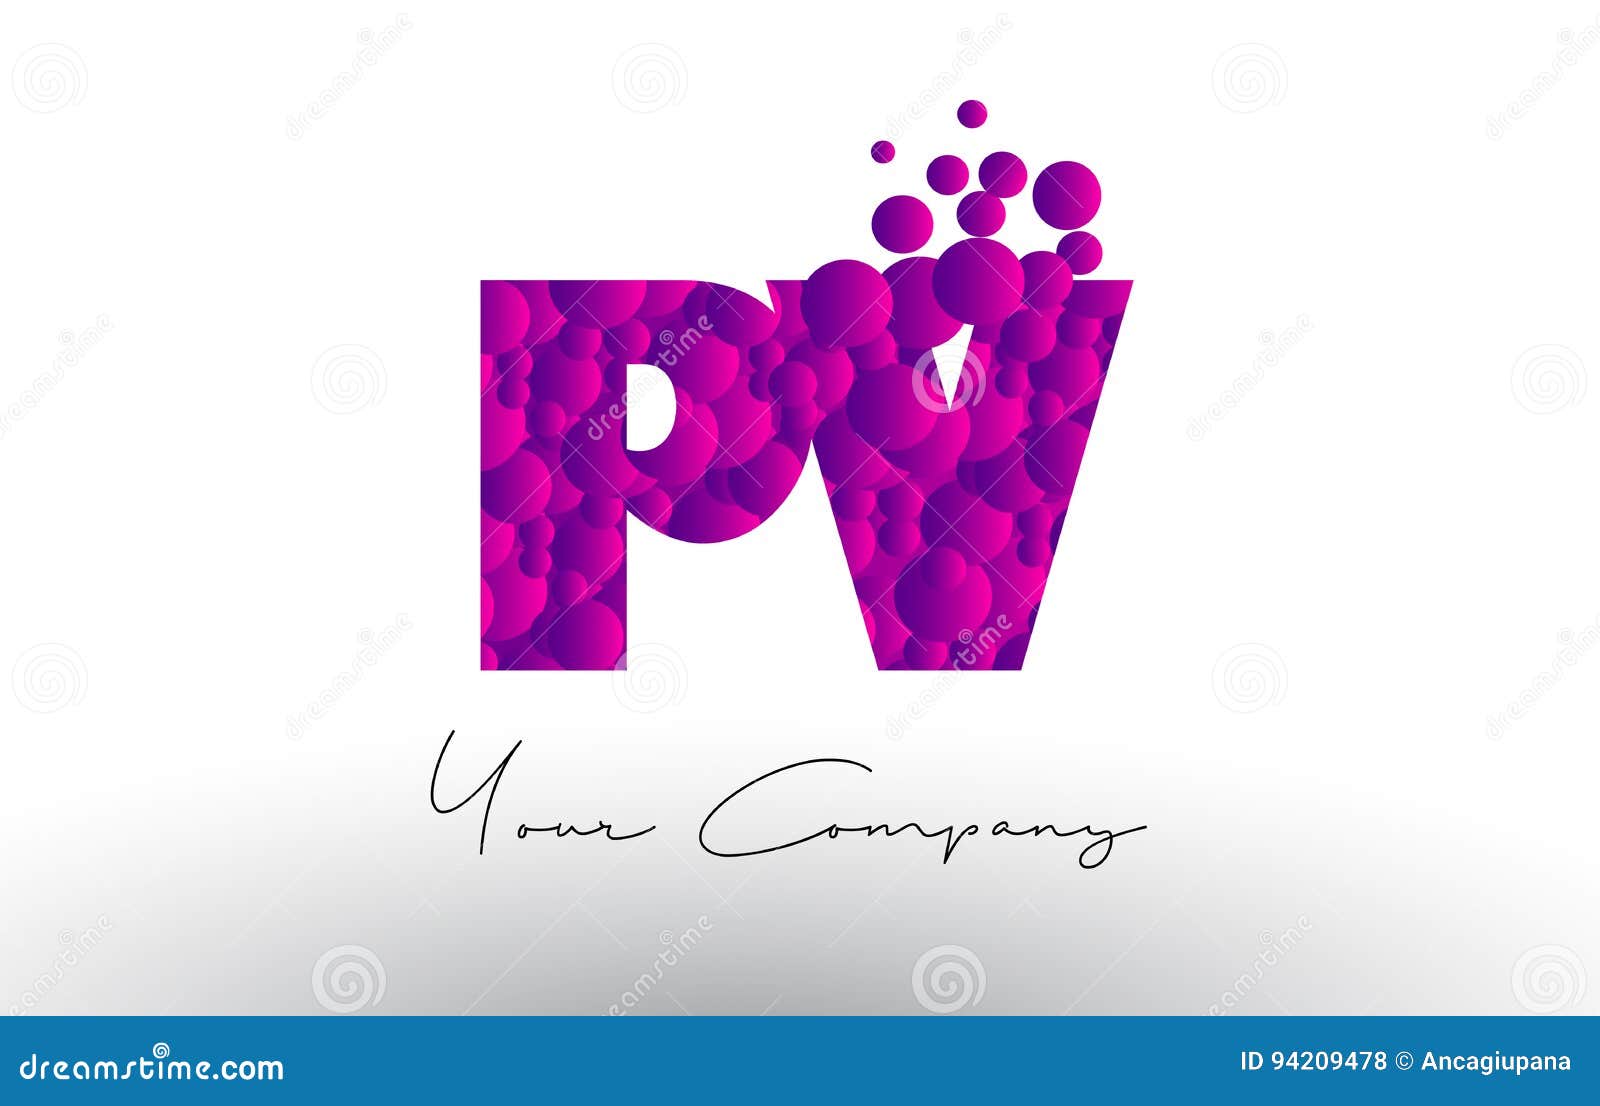 Pv P V Dots Letter Logo With Purple Bubbles Texture Stock Vector Illustration Of Texture Business